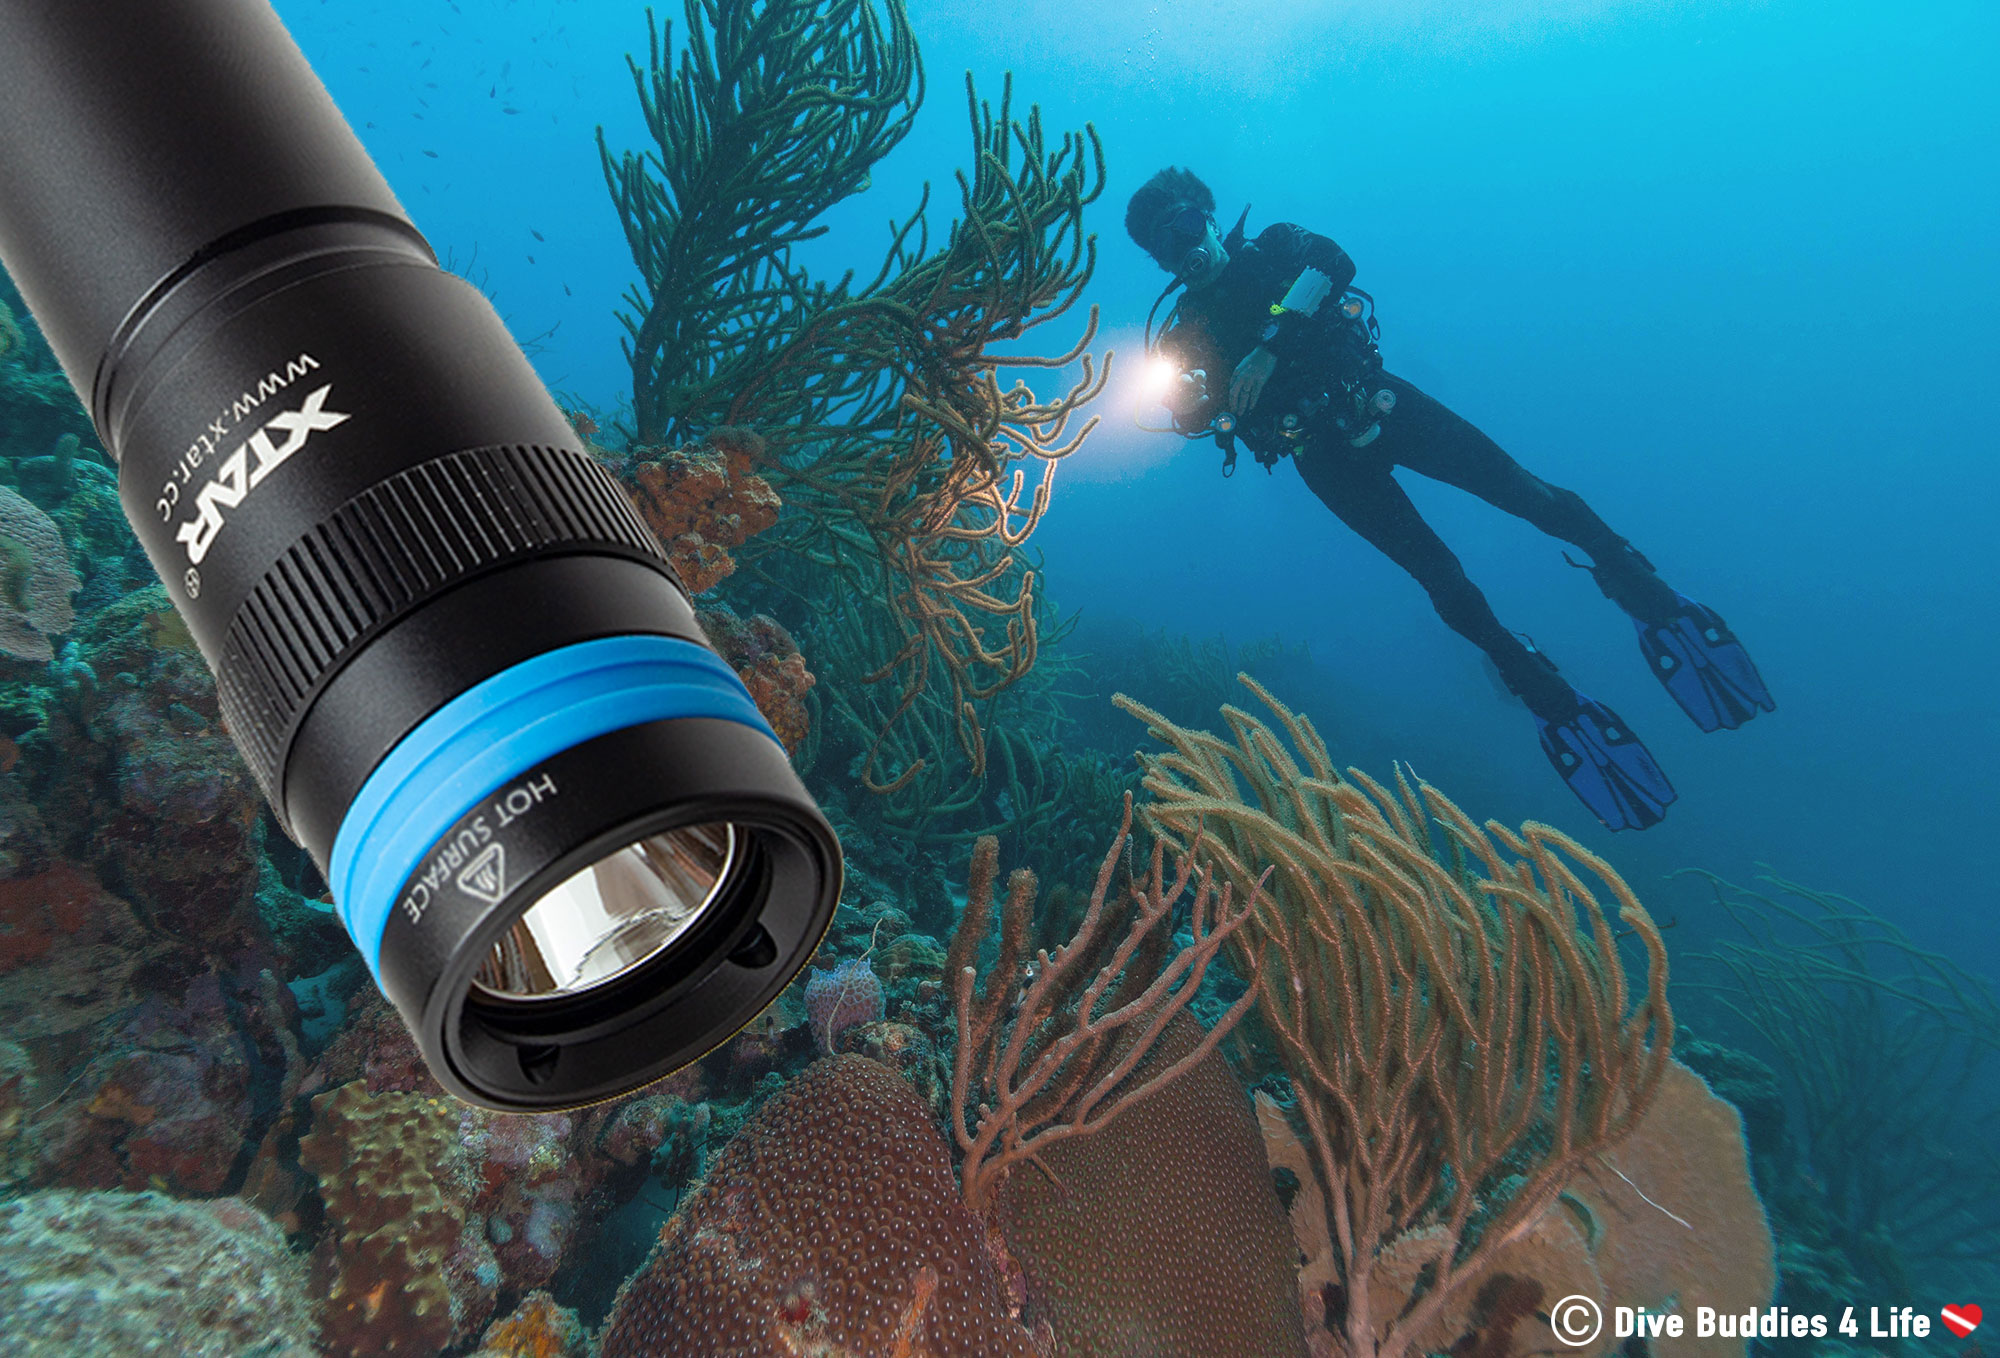 Xtar Dive Light On A Coral Reef